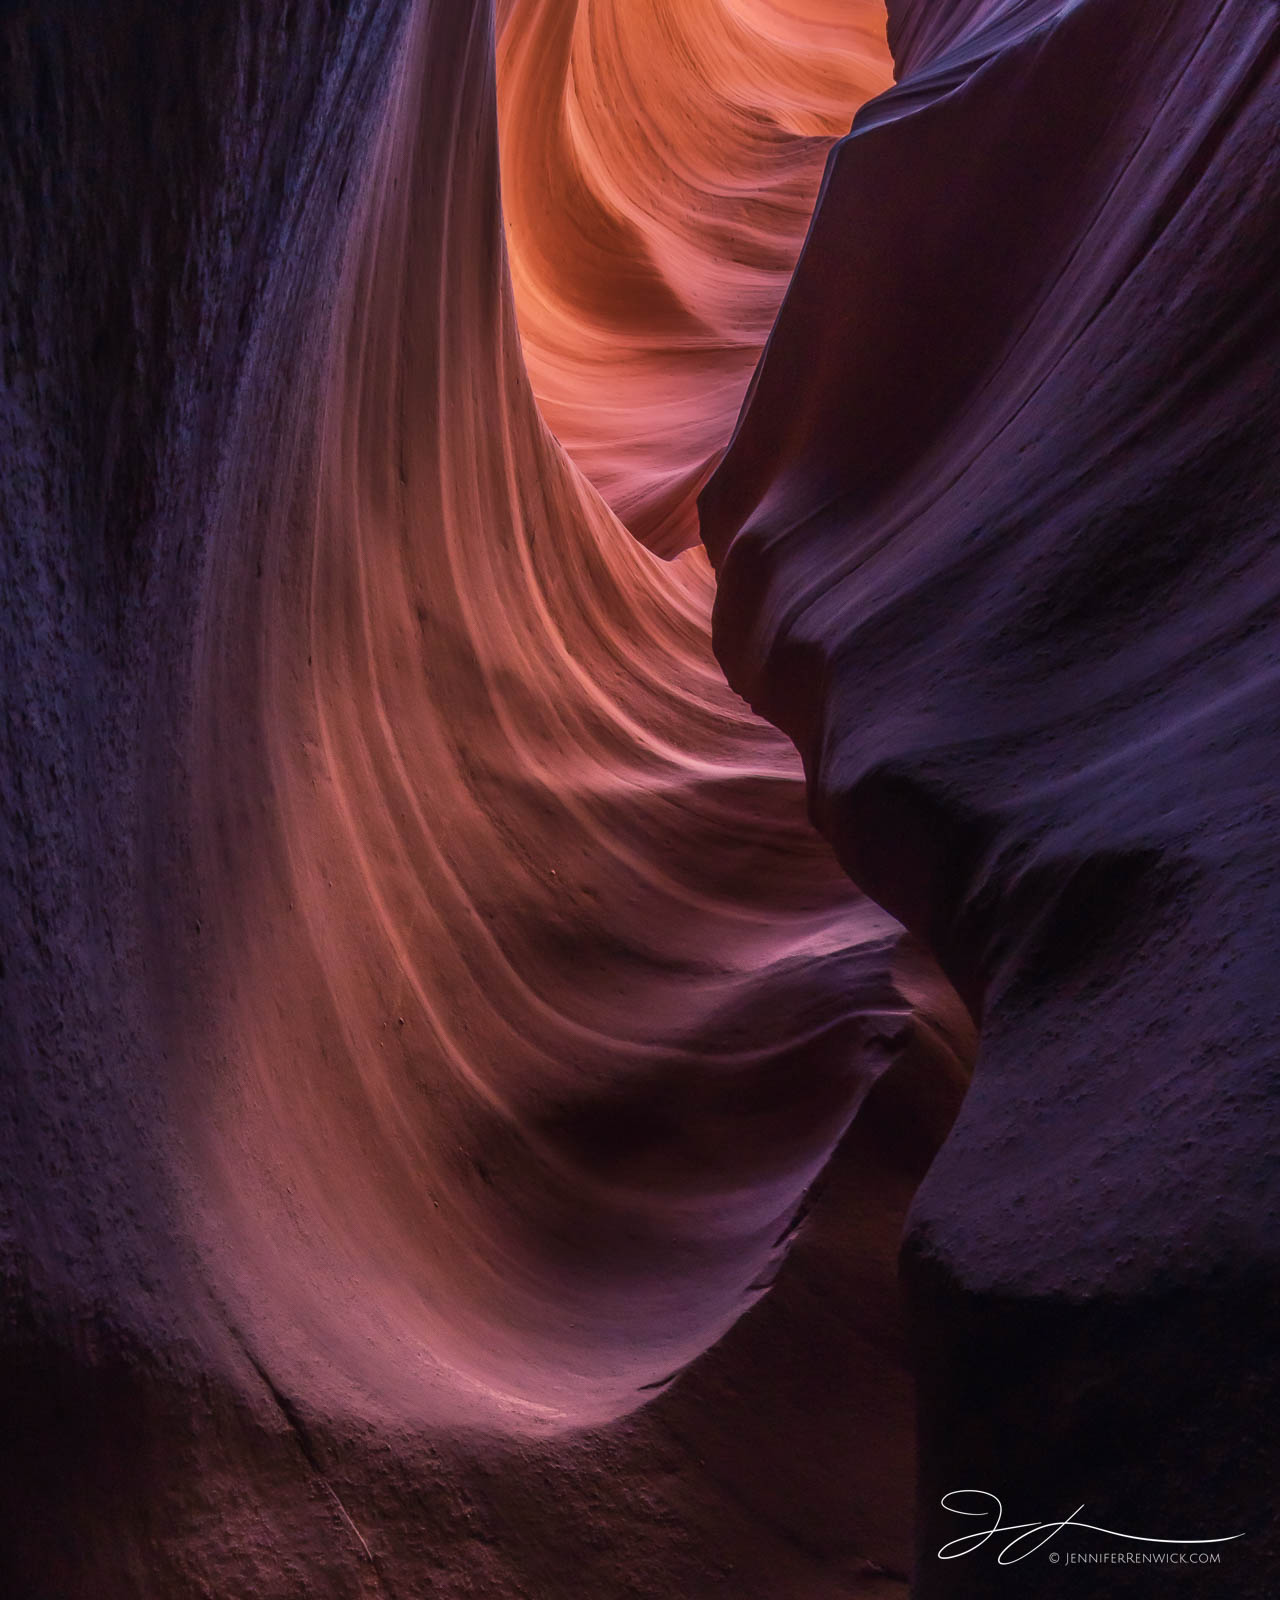 Colors glow in a crevice of a slot canyon.